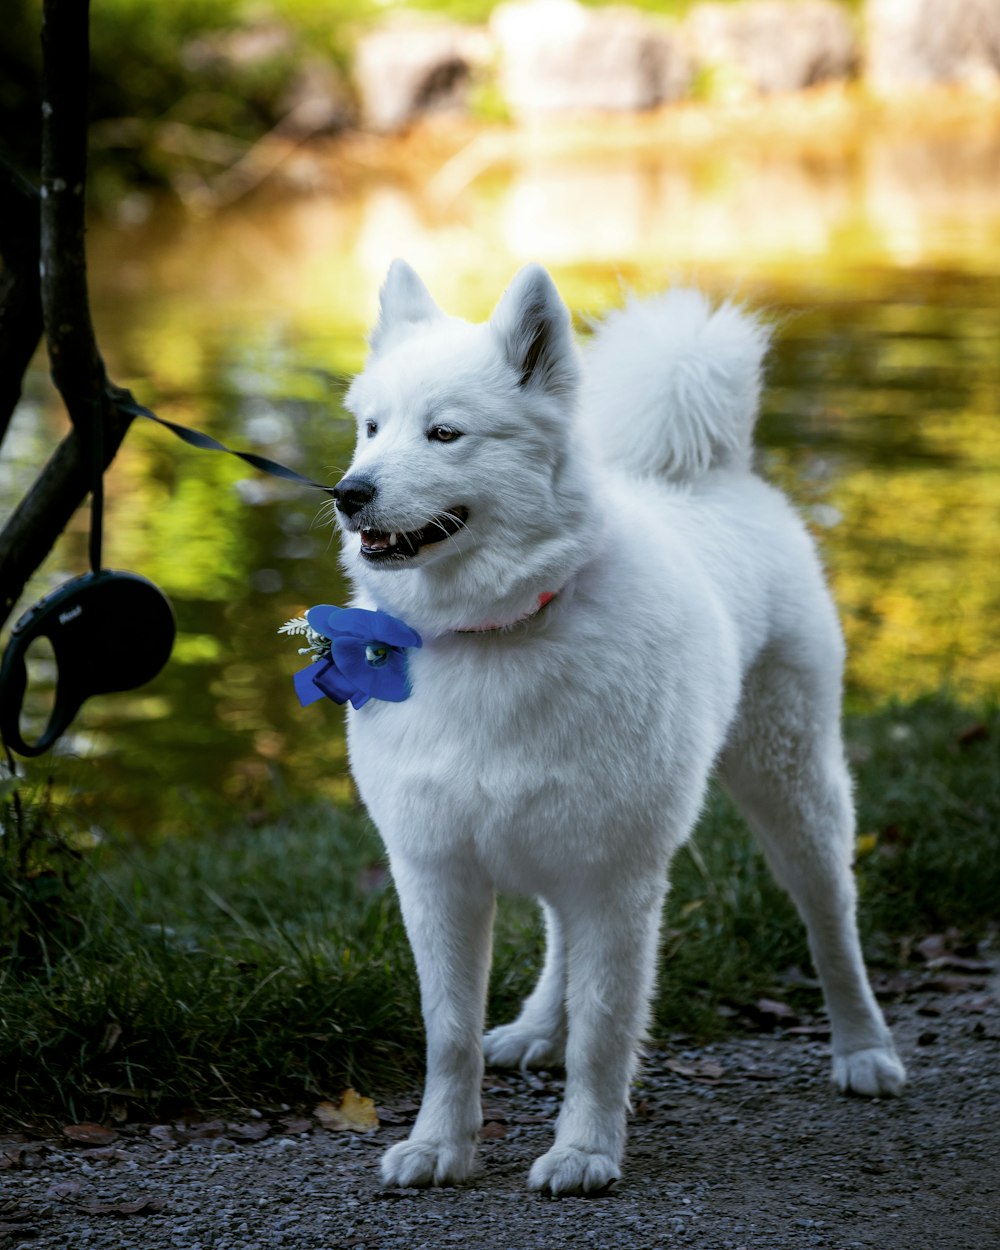 white short coated dog with blue collar